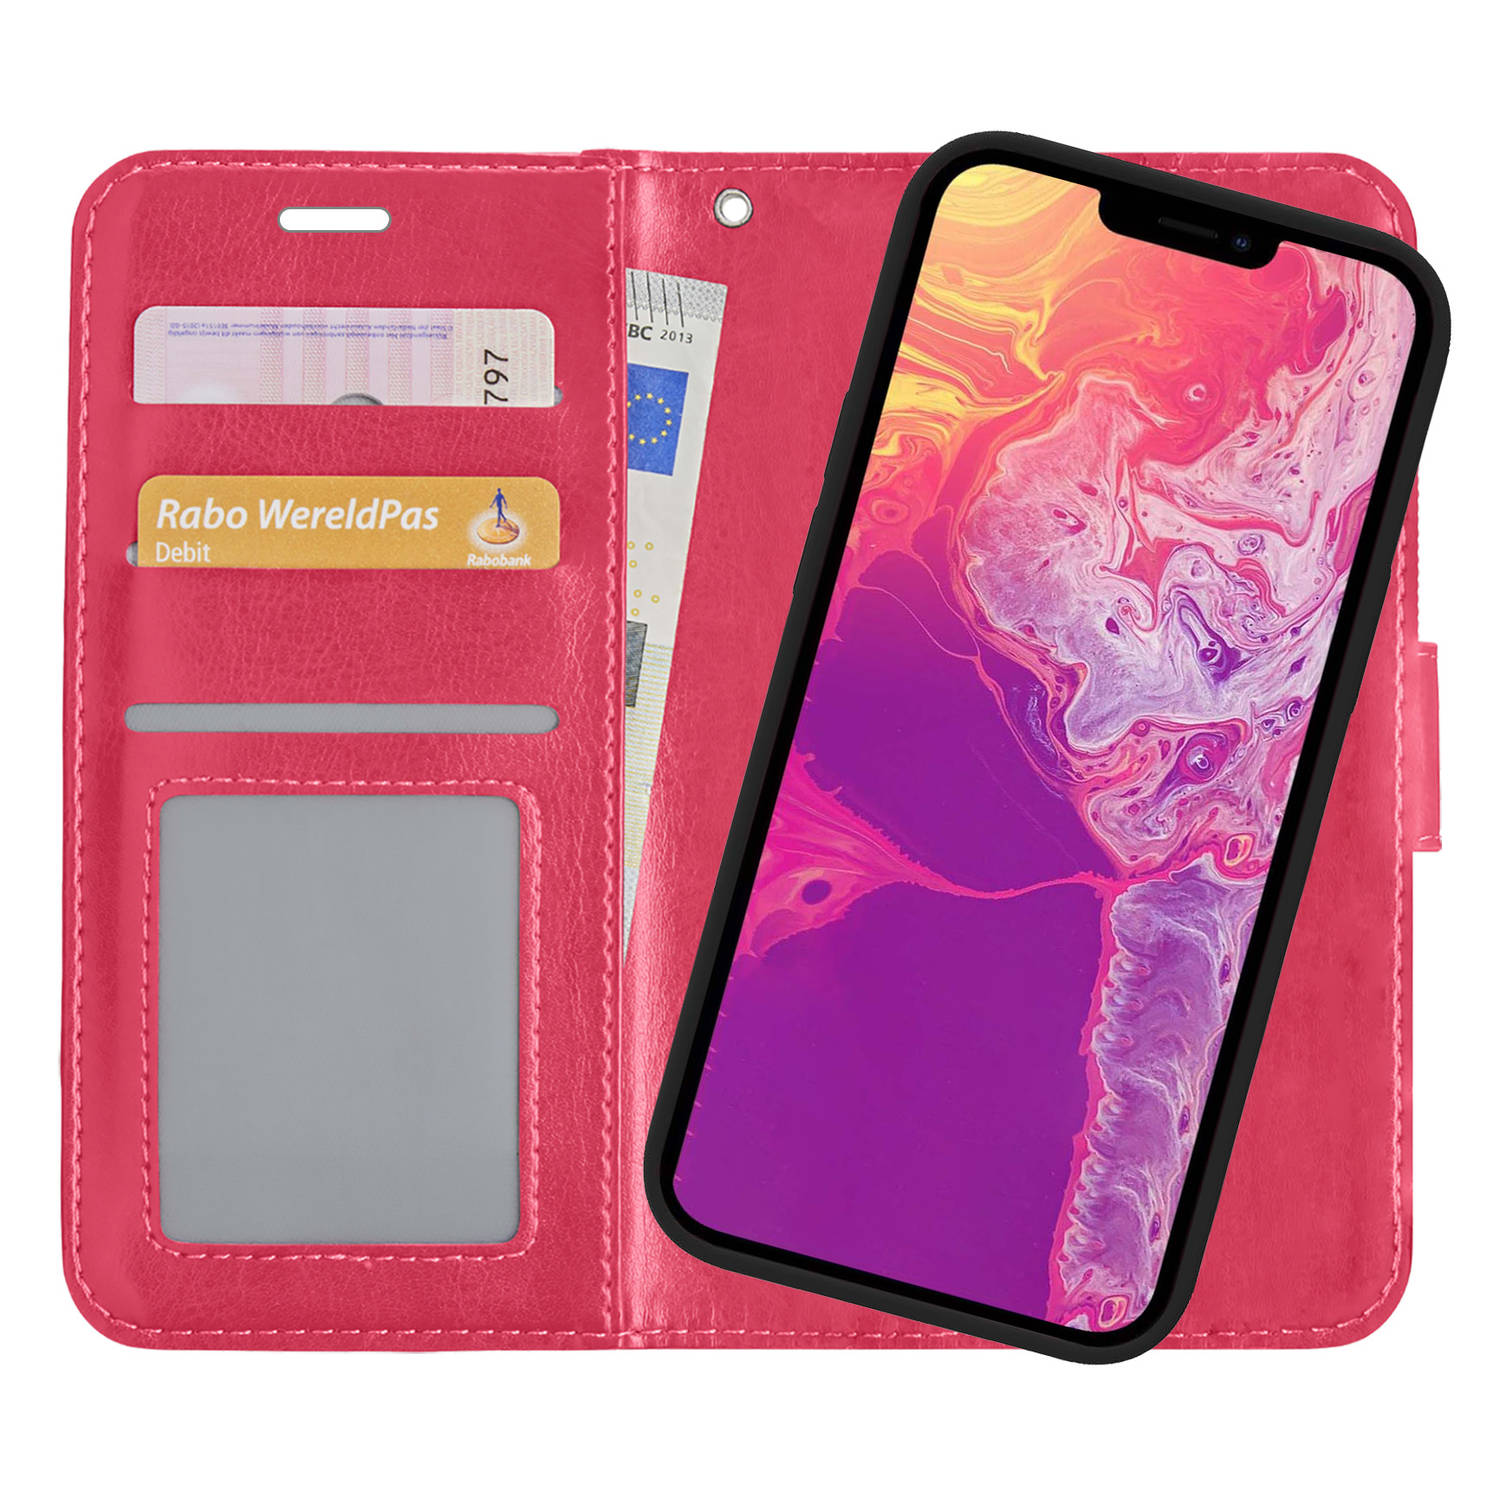 iPhone 13 Pro Max Hoesje Bookcase Hoes 2-in-1 Cover - iPhone 13 Pro Max Hoes 2-in-1 Hoesje Case - Donker Roze